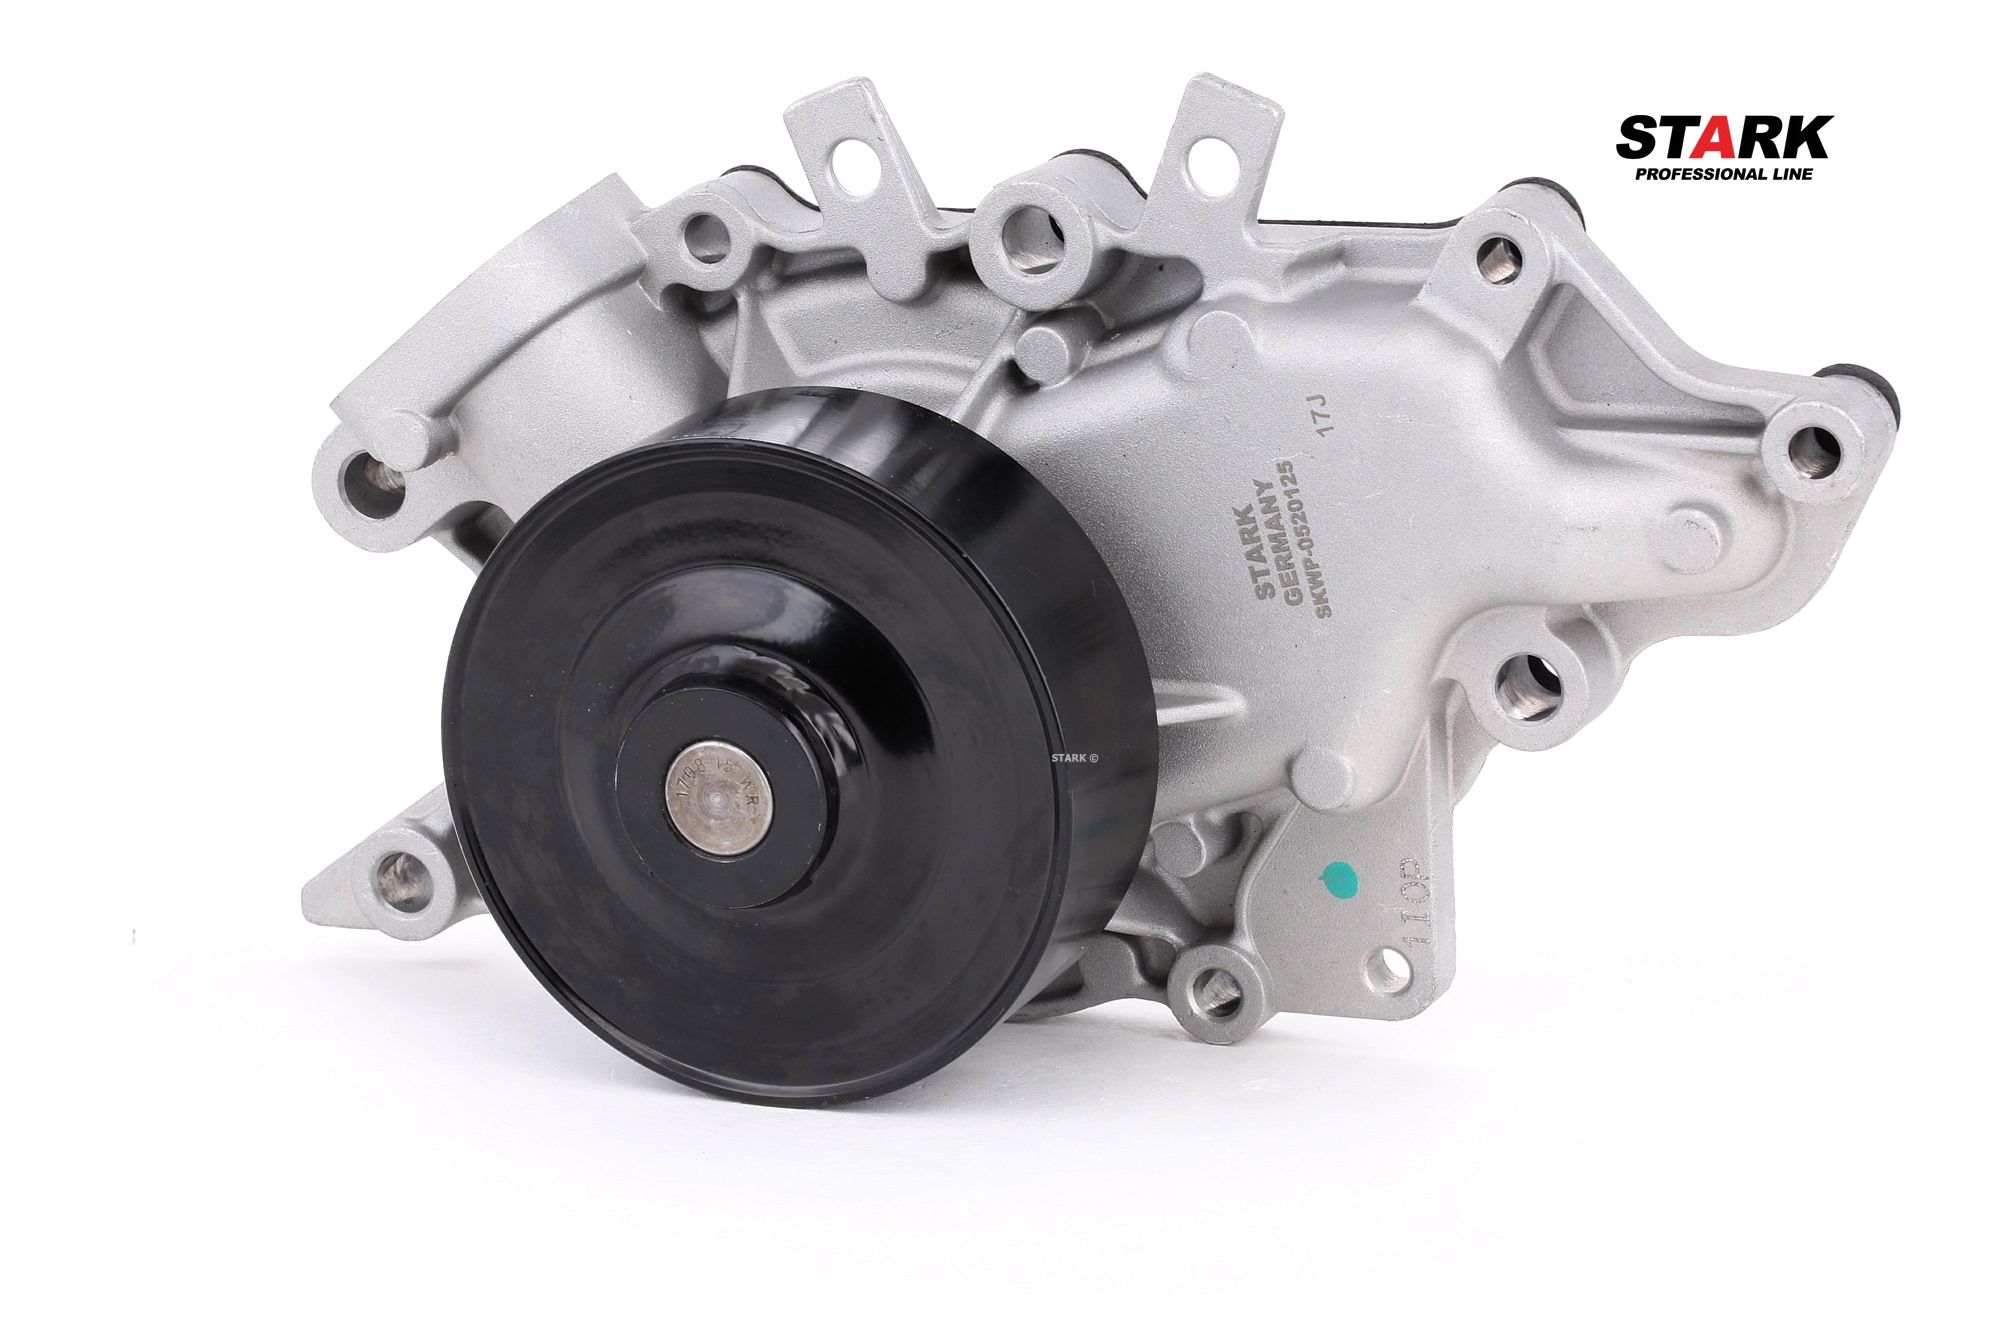 STARK SKWP-0520125 Water pump Cast Aluminium, with belt pulley, with seal, Mechanical, Metal, for v-ribbed belt use